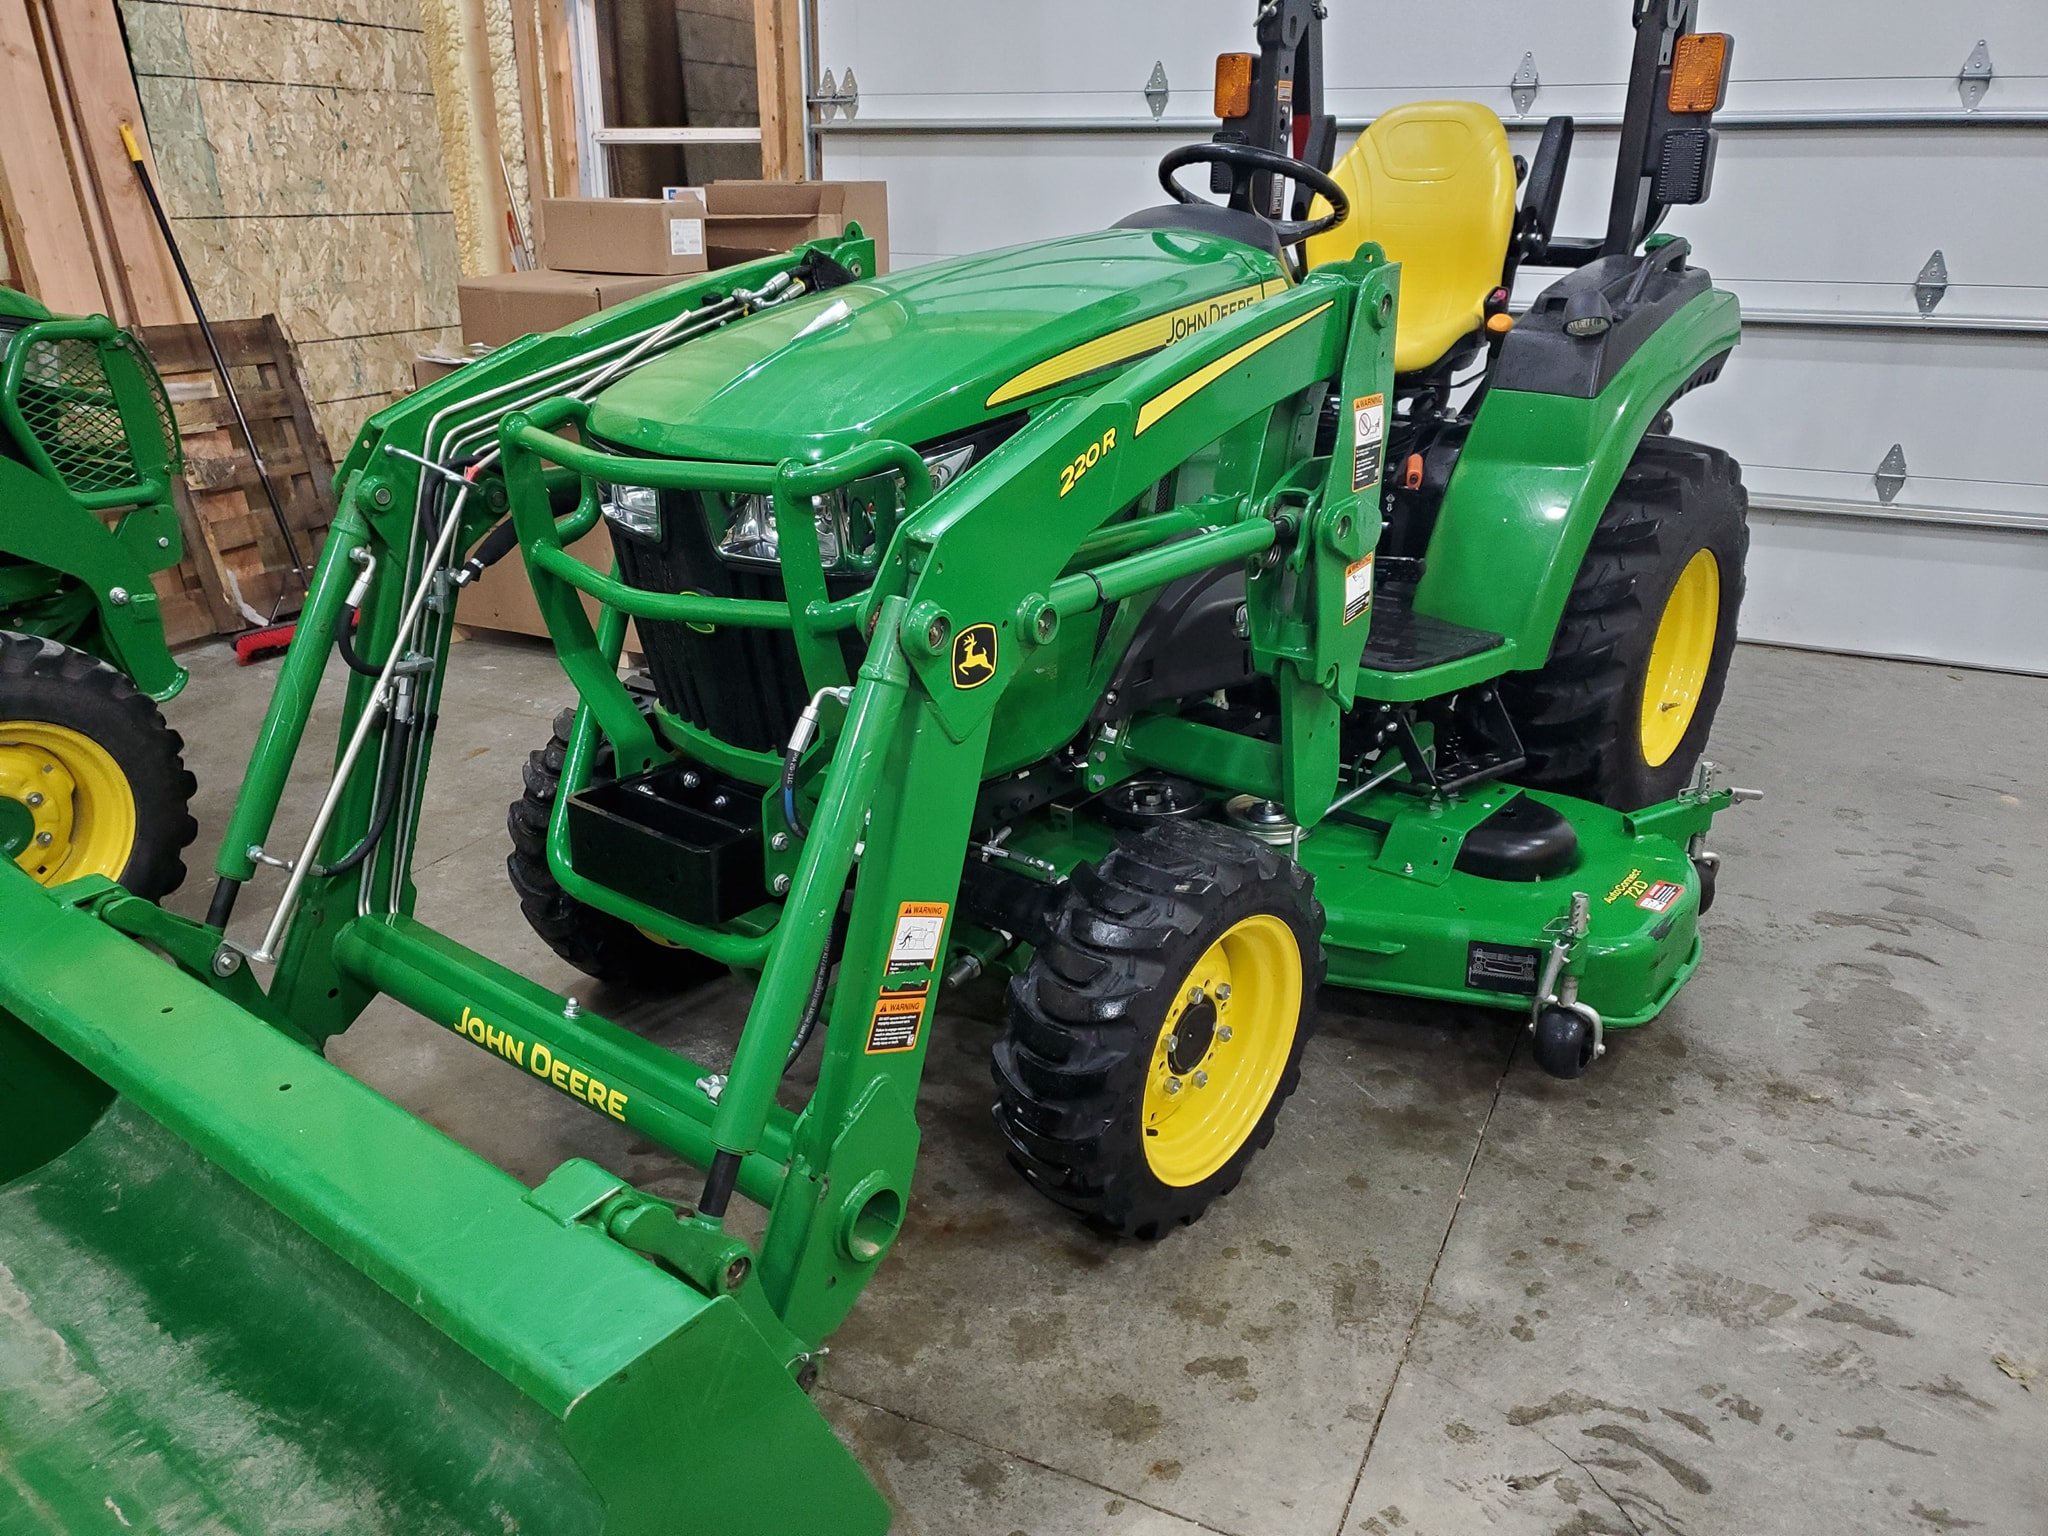 Sold 2018 John Deere 2032r And Attachments Package Regreen Equipment